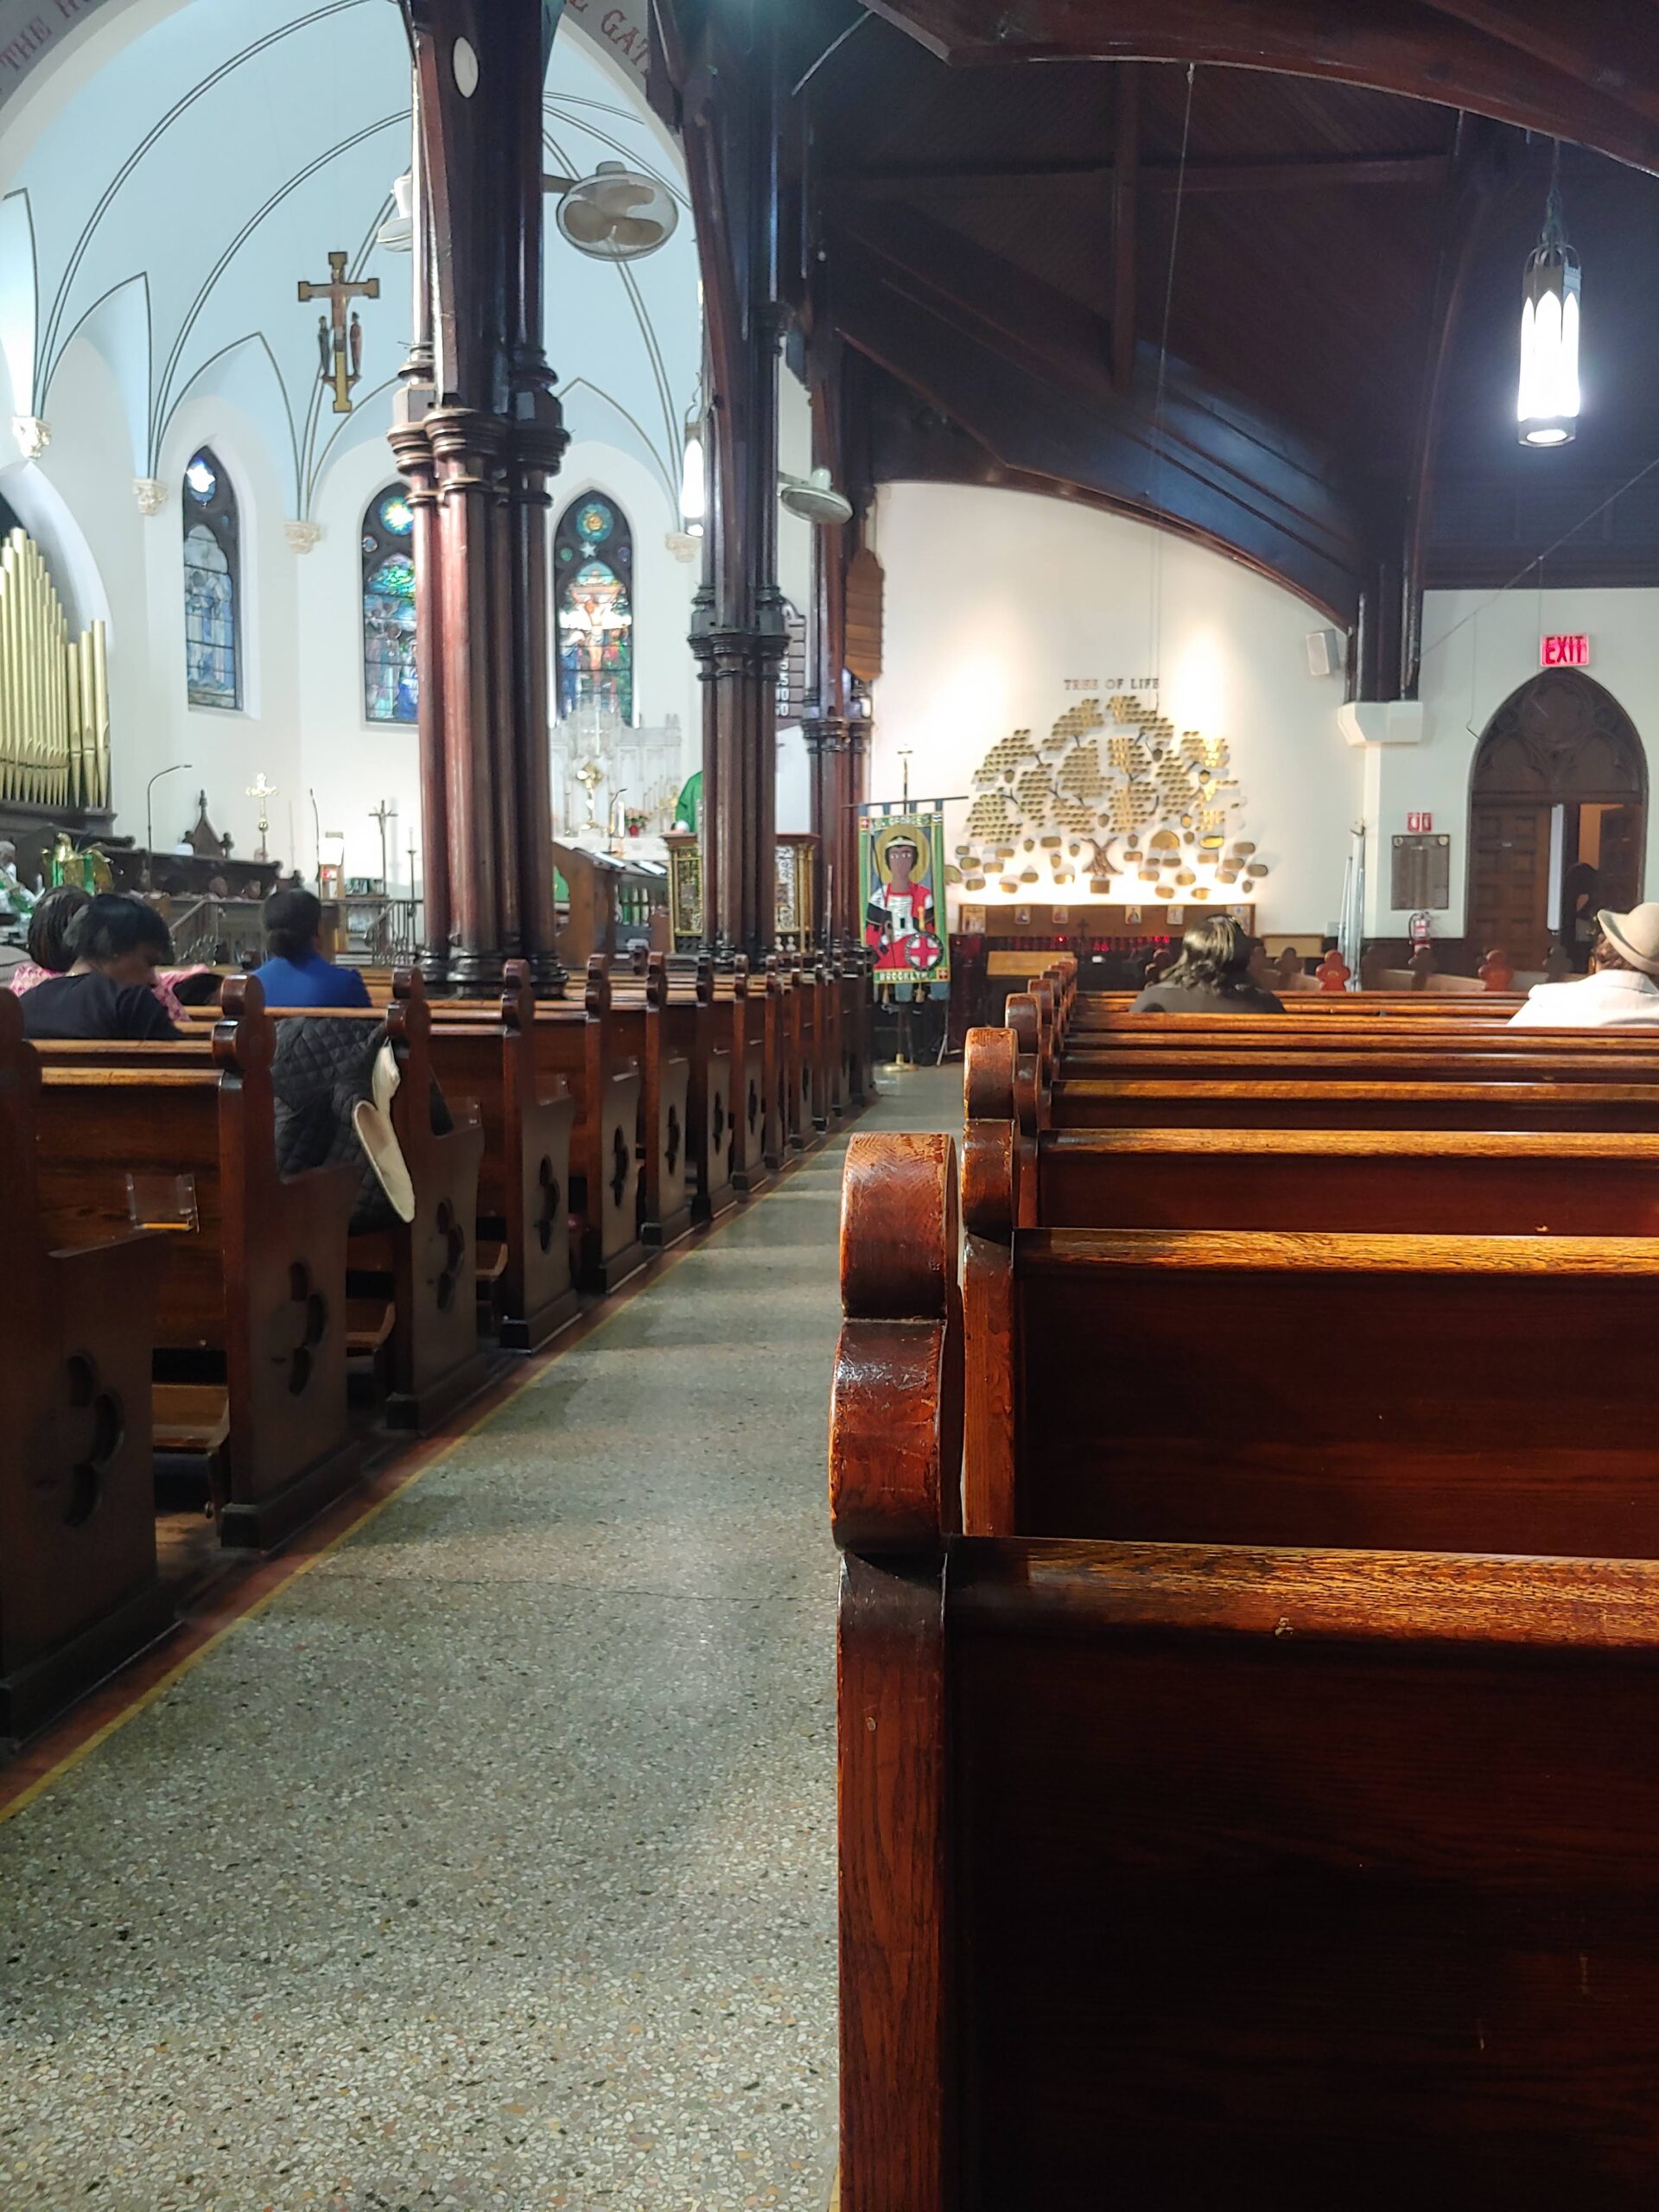 Photograph of the aisle and pews of St. George's Church.